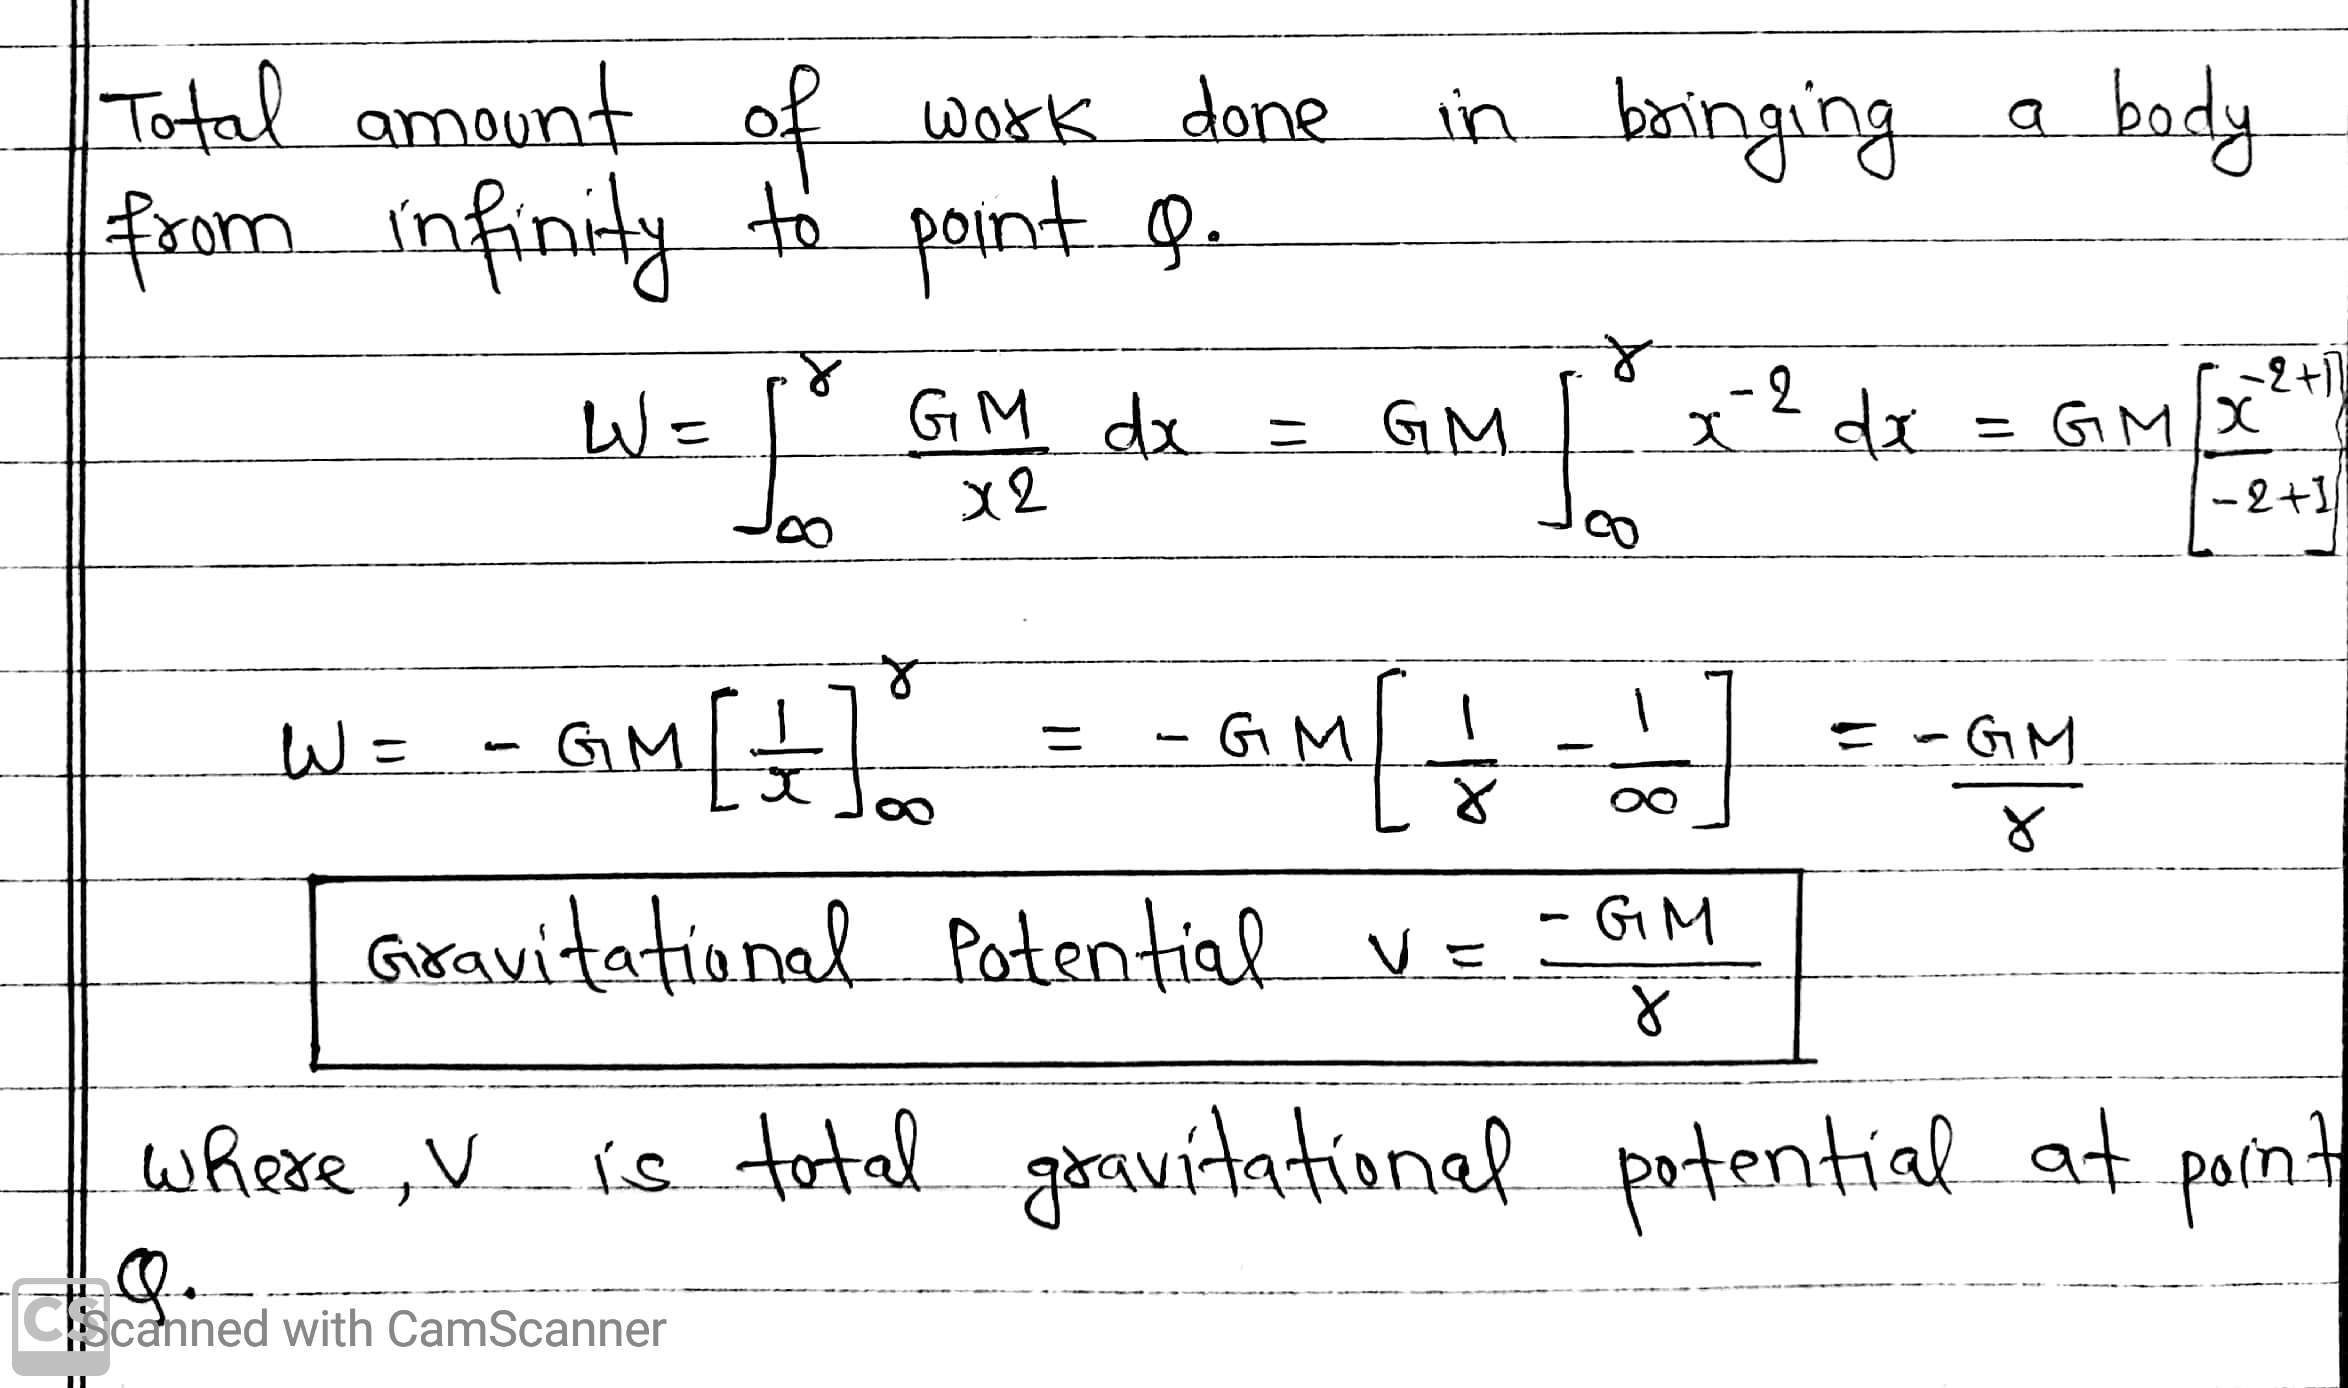 Expression For Gravitational Potential 

